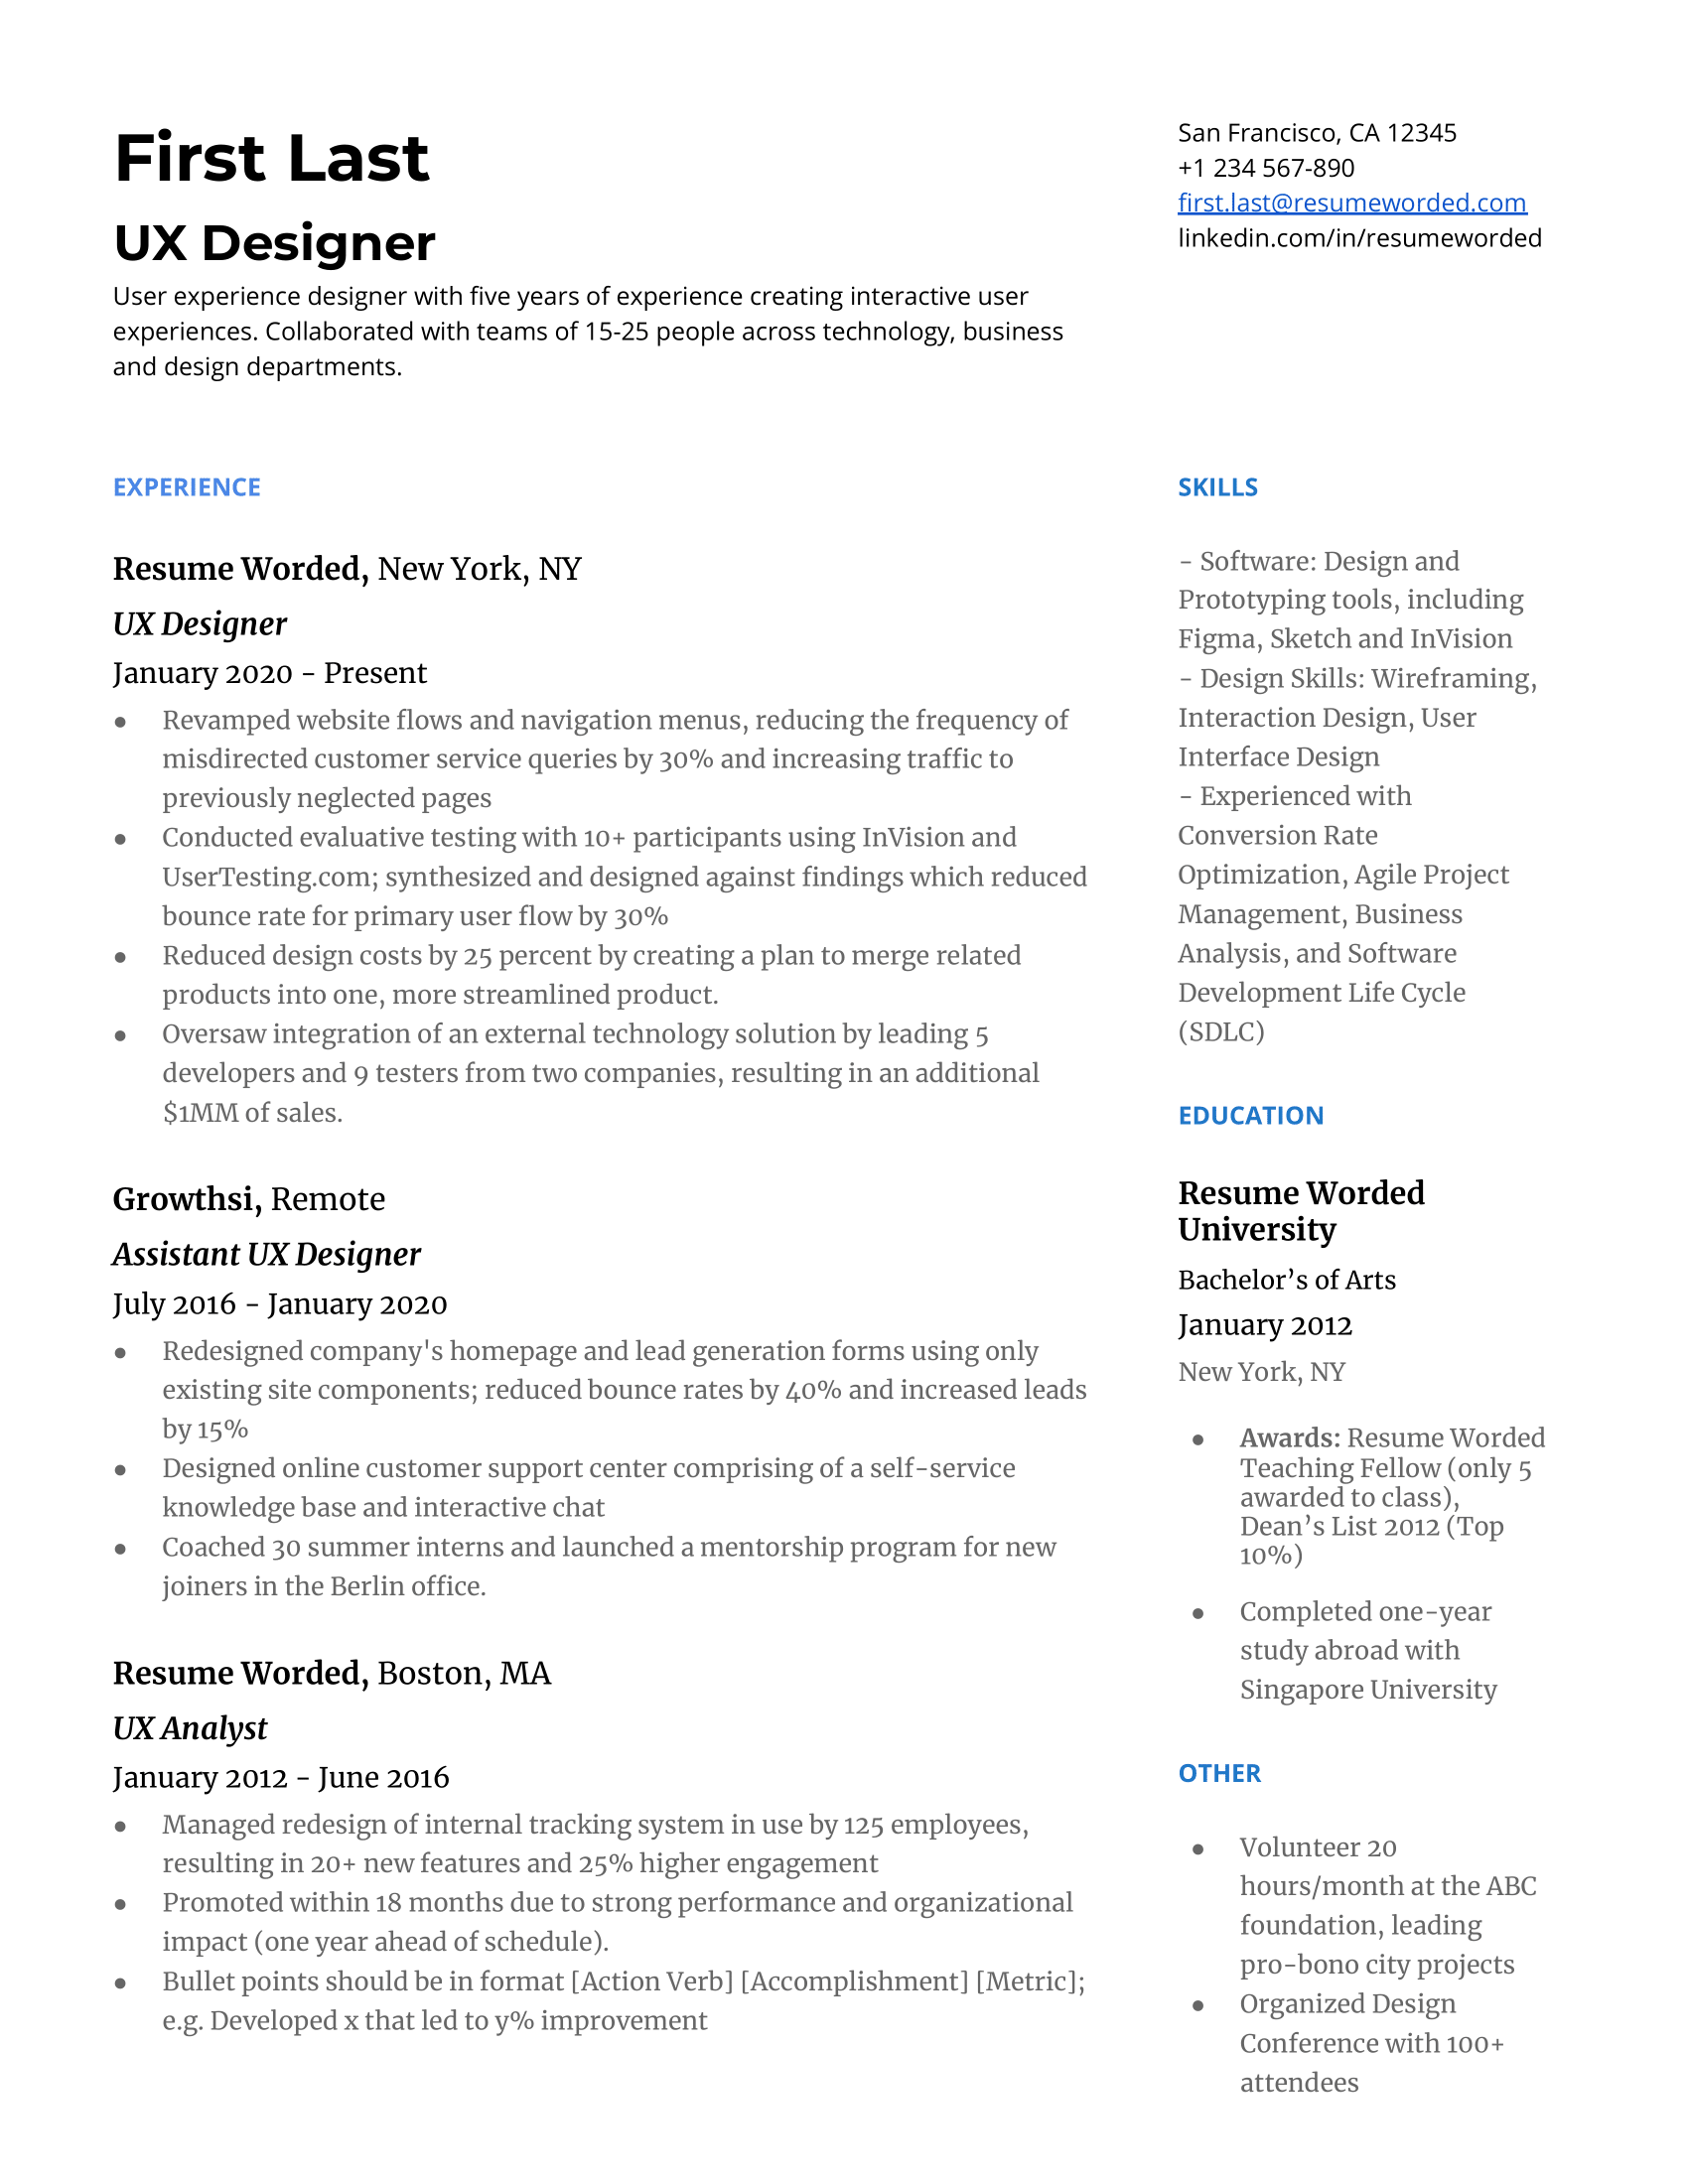 UX designer resume template with skills section and focus on relevant experience